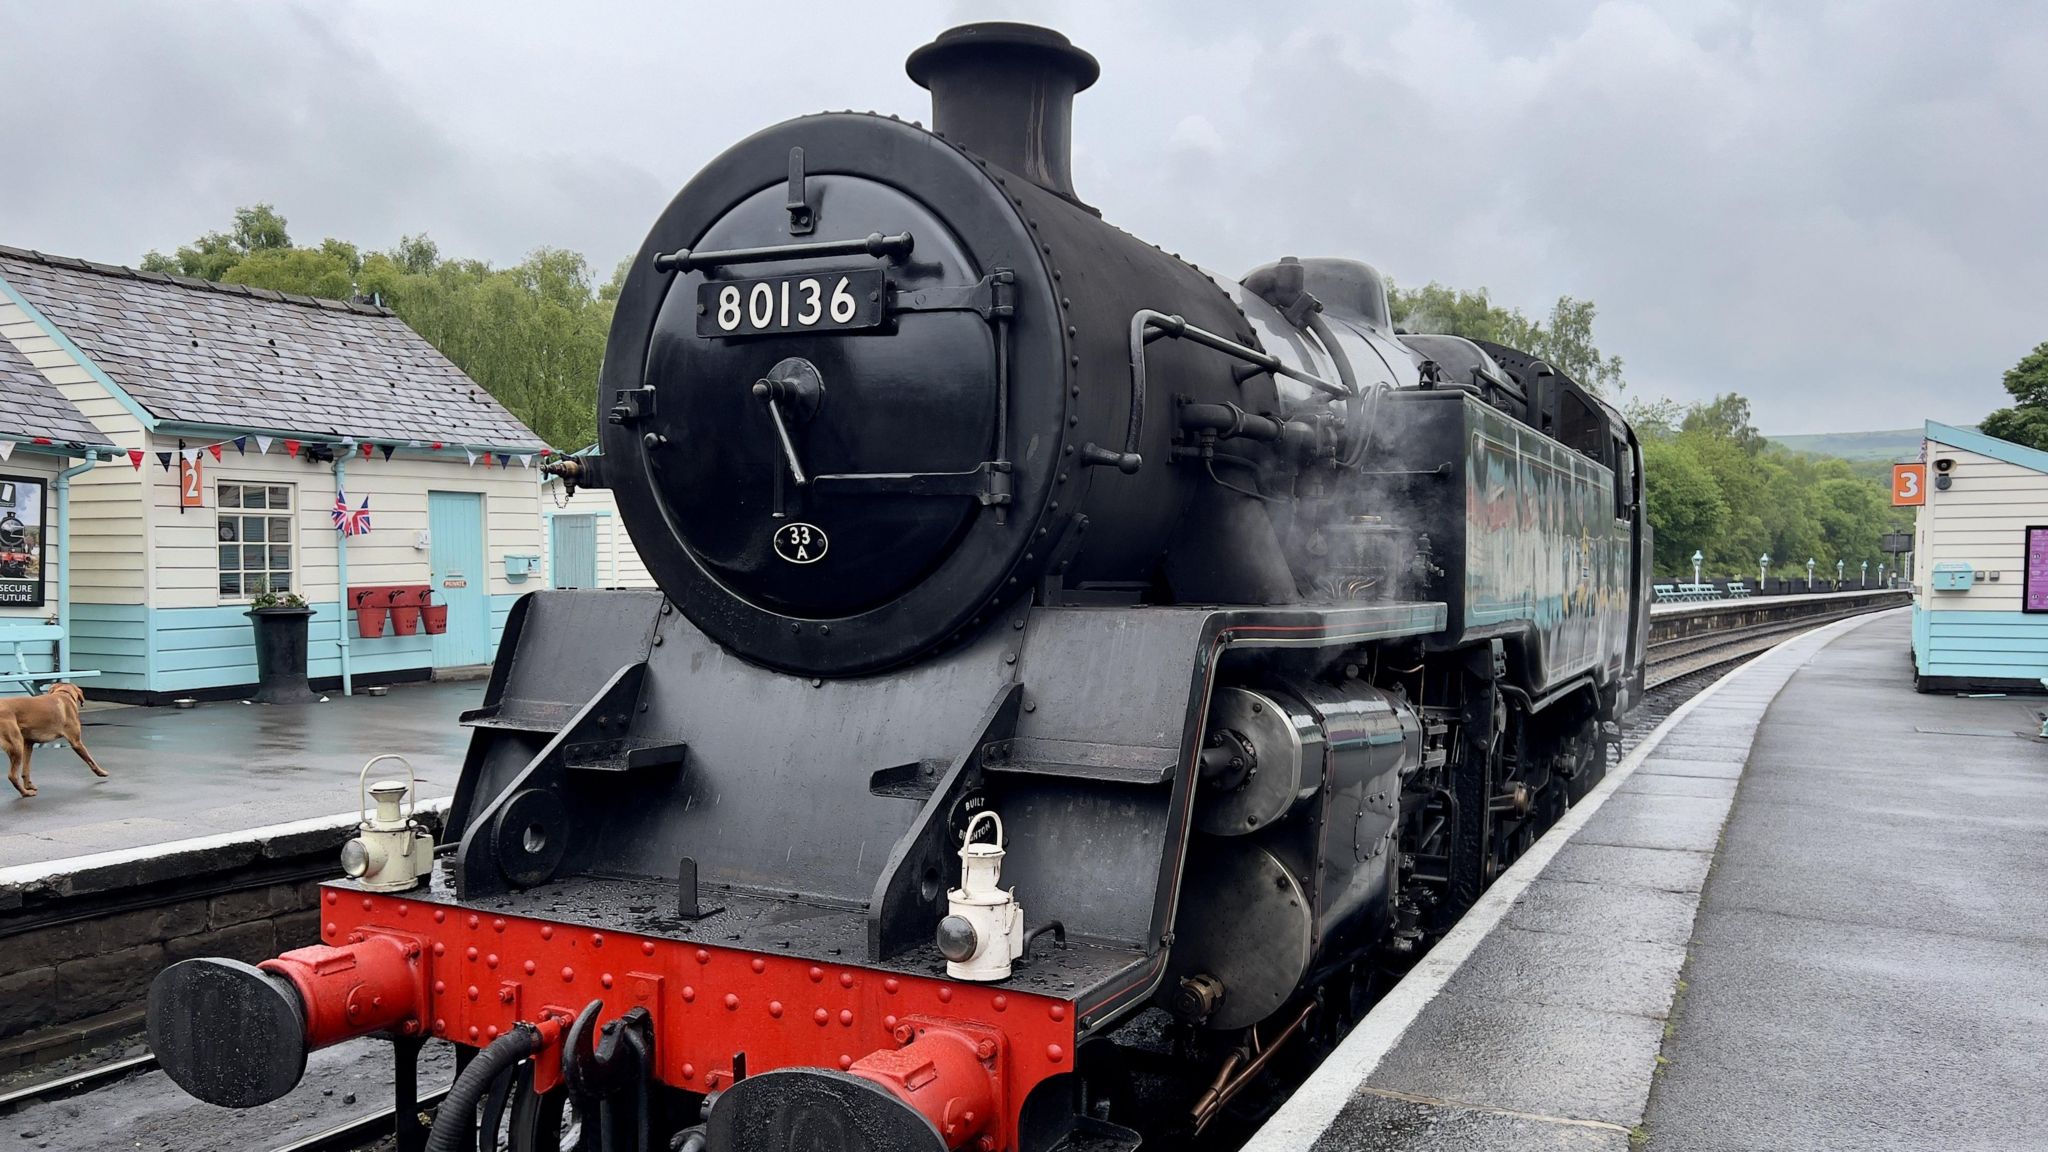 A steam train in Grosmont station at the North York Moors Railway